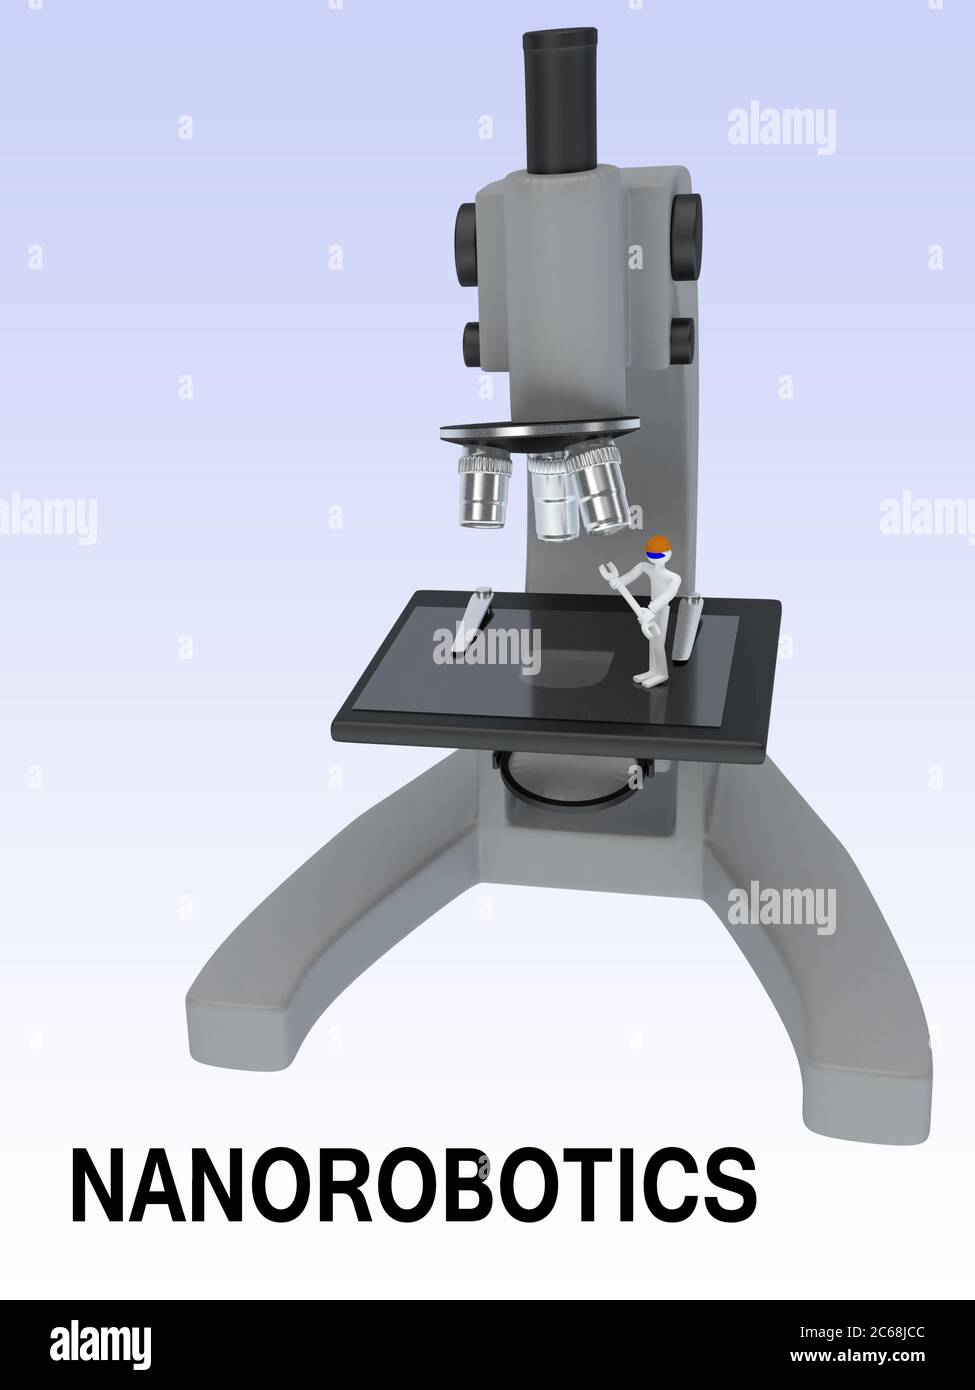 3D illustration of a microscope with a robot and NANOROBOTICS title, isolated over blue gradient. Stock Photo